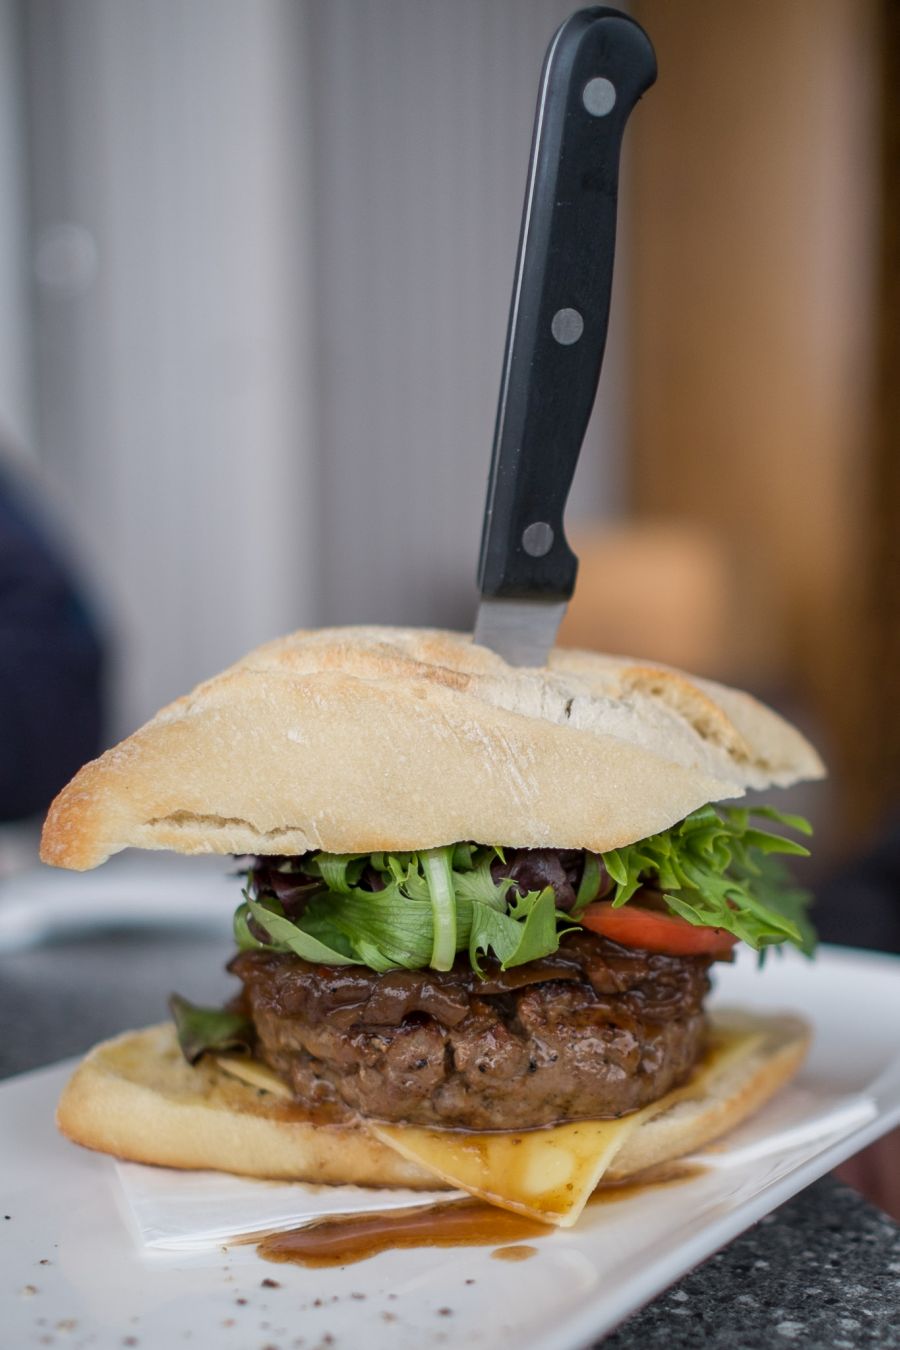 Bruny Island Premium Beef Burger (AU$16) - with cheese, lettuce, tomato, onion chilli jam and choice of sauce (tomato, BBQ or sweet chilli)